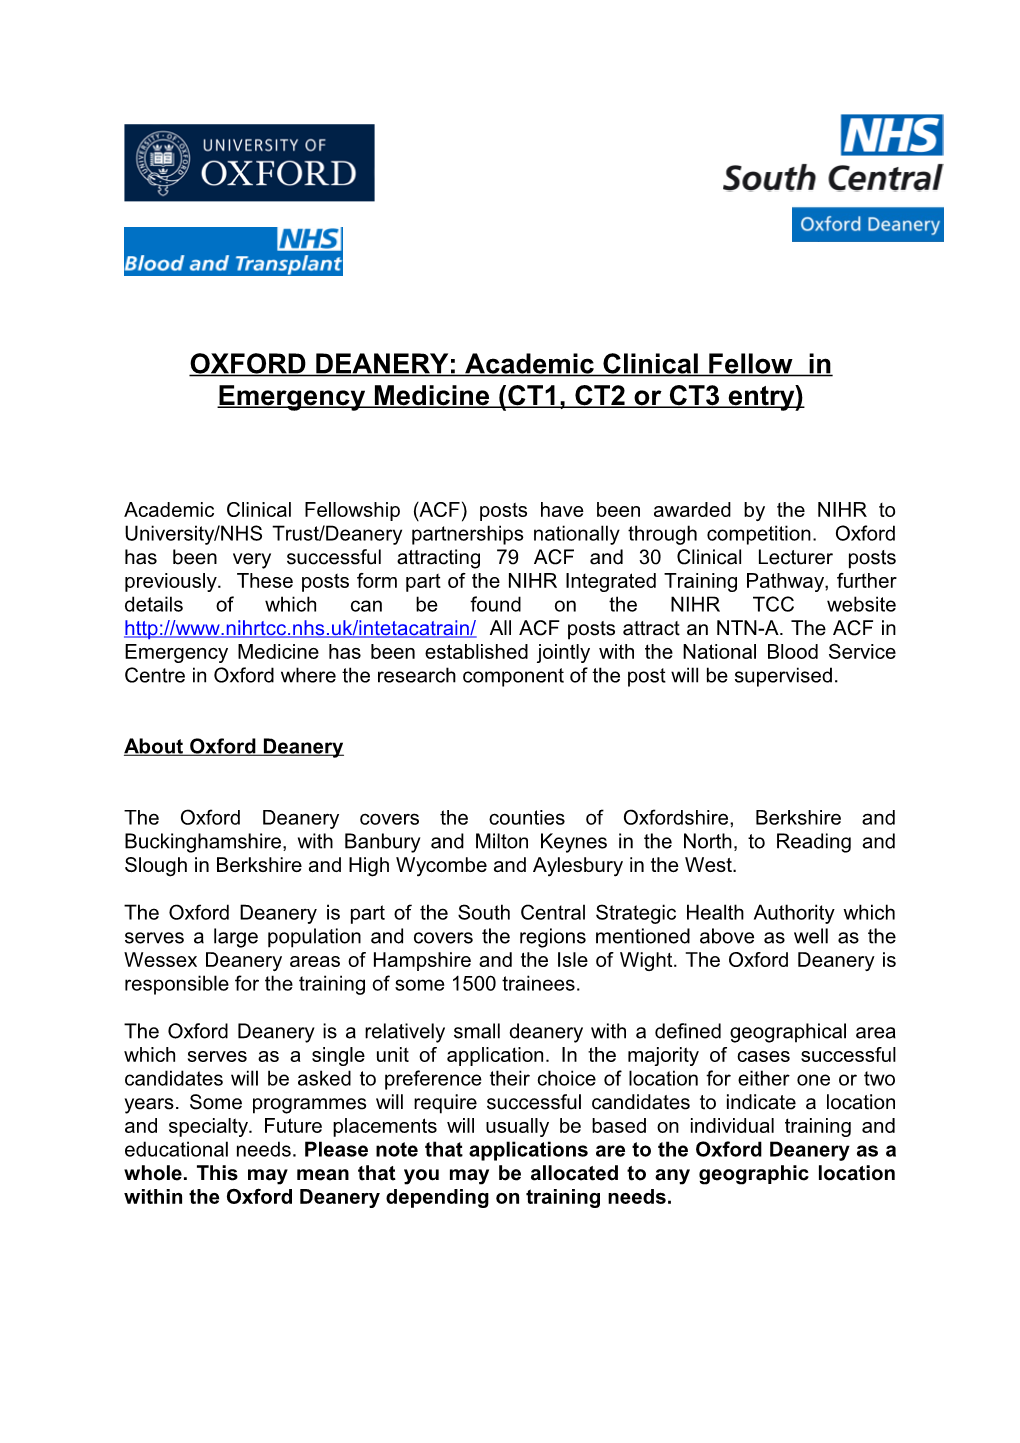 OXFORD DEANERY:Academic Clinical Fellow in Emergency Medicine (CT1, CT2 Or CT3 Entry)